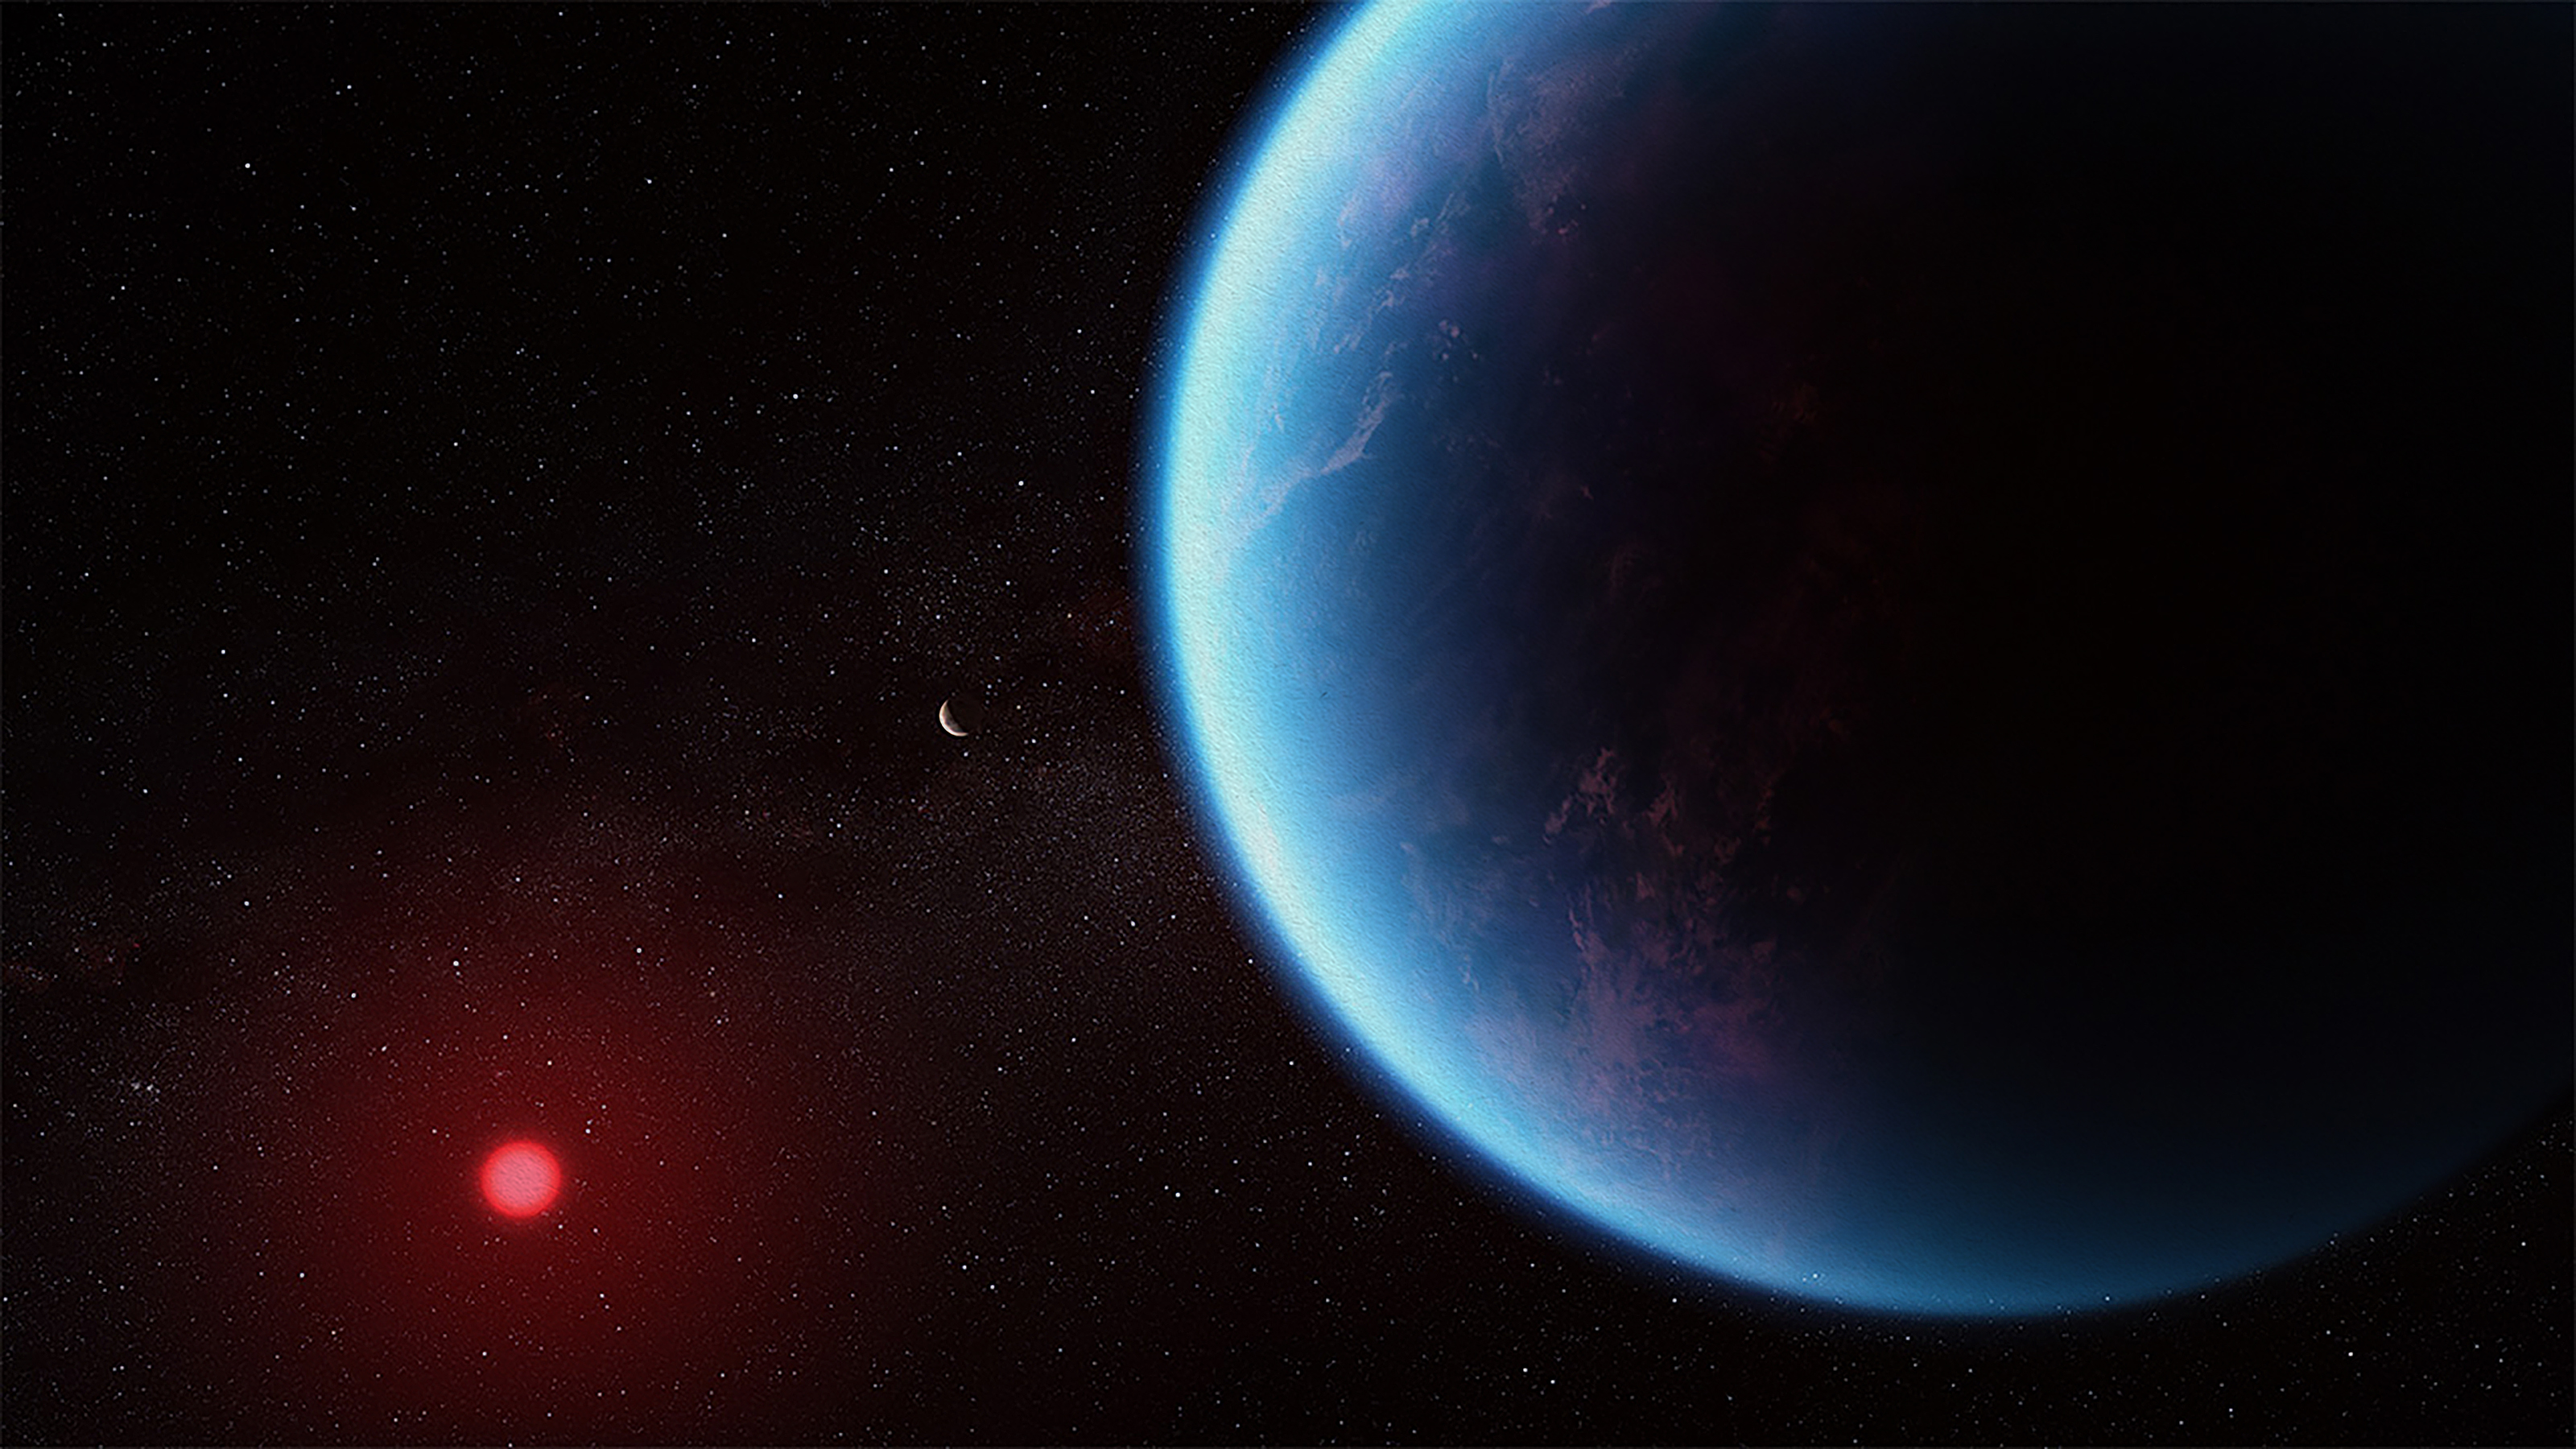 An artist's rendering of an alien planet and a red star.